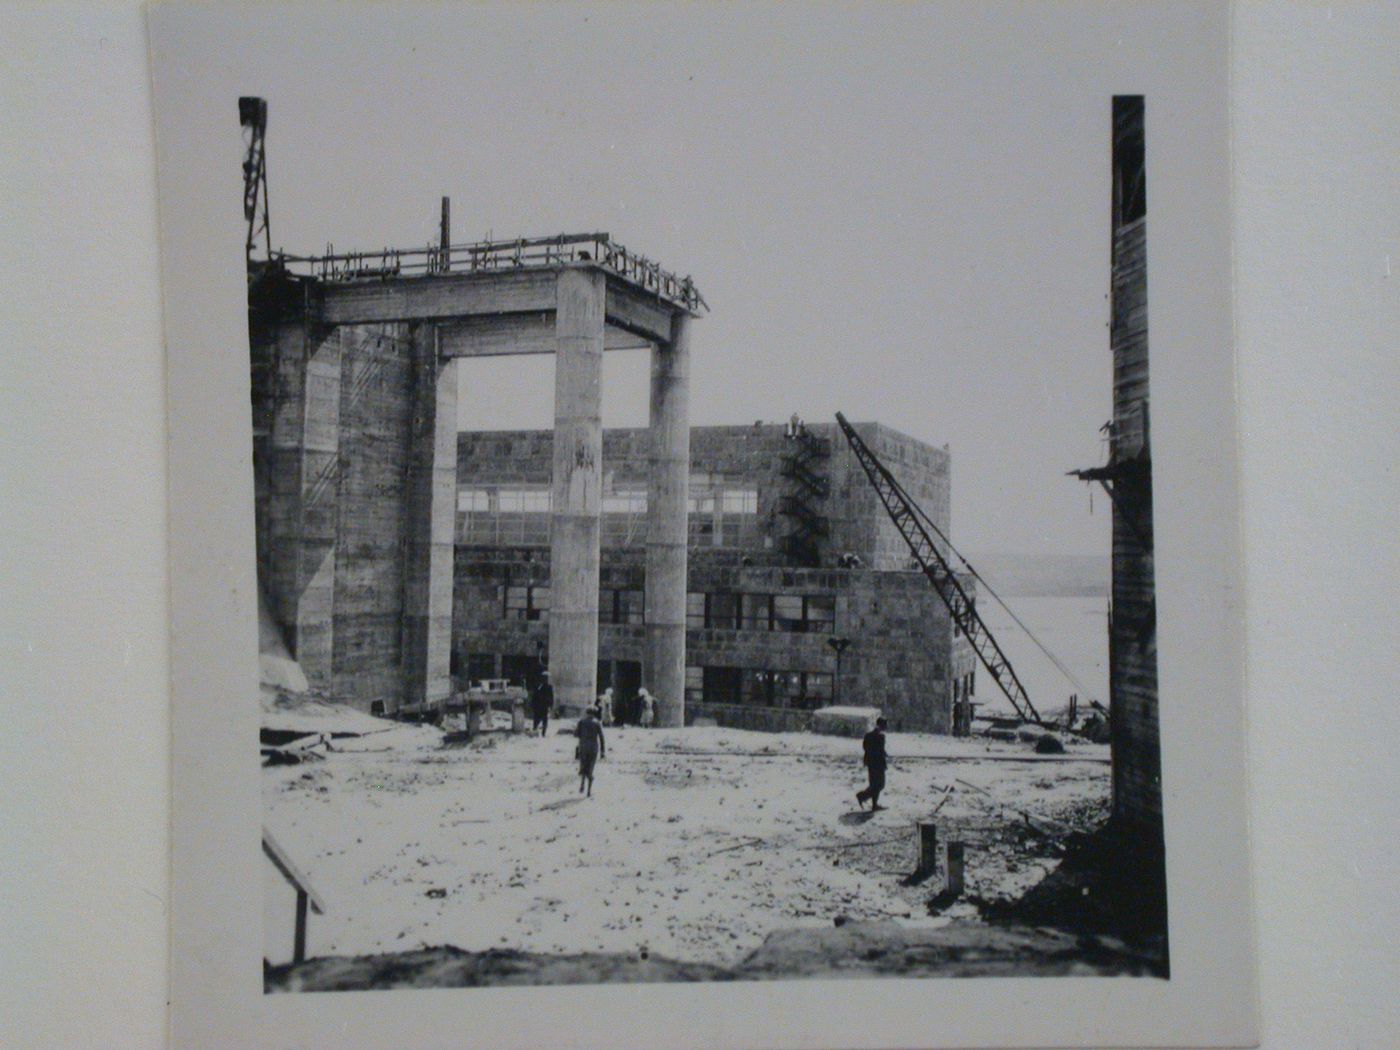 View of Dnieper Hydroelectric Power Station buildings under construction, Zaporozhe, Soviet Union (now in Ukraine)